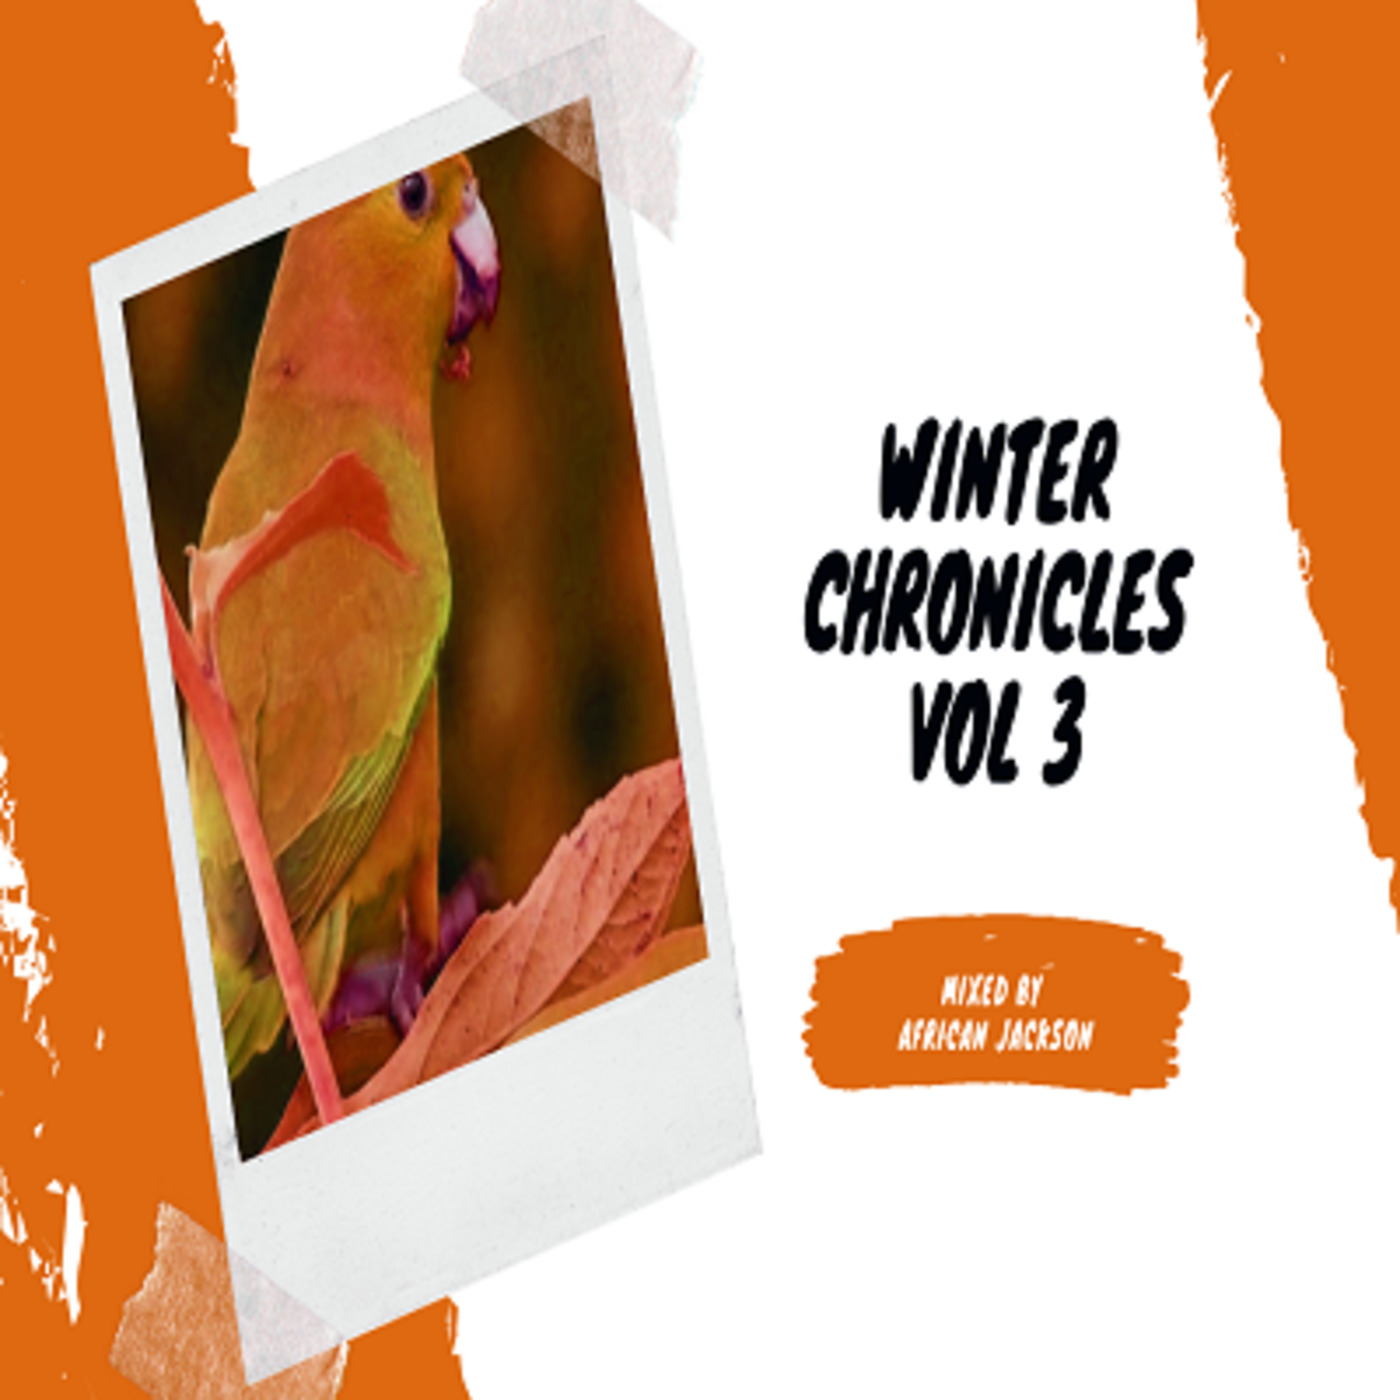 Winter Chronicles Vol 3 Piano Mix By African Jackson